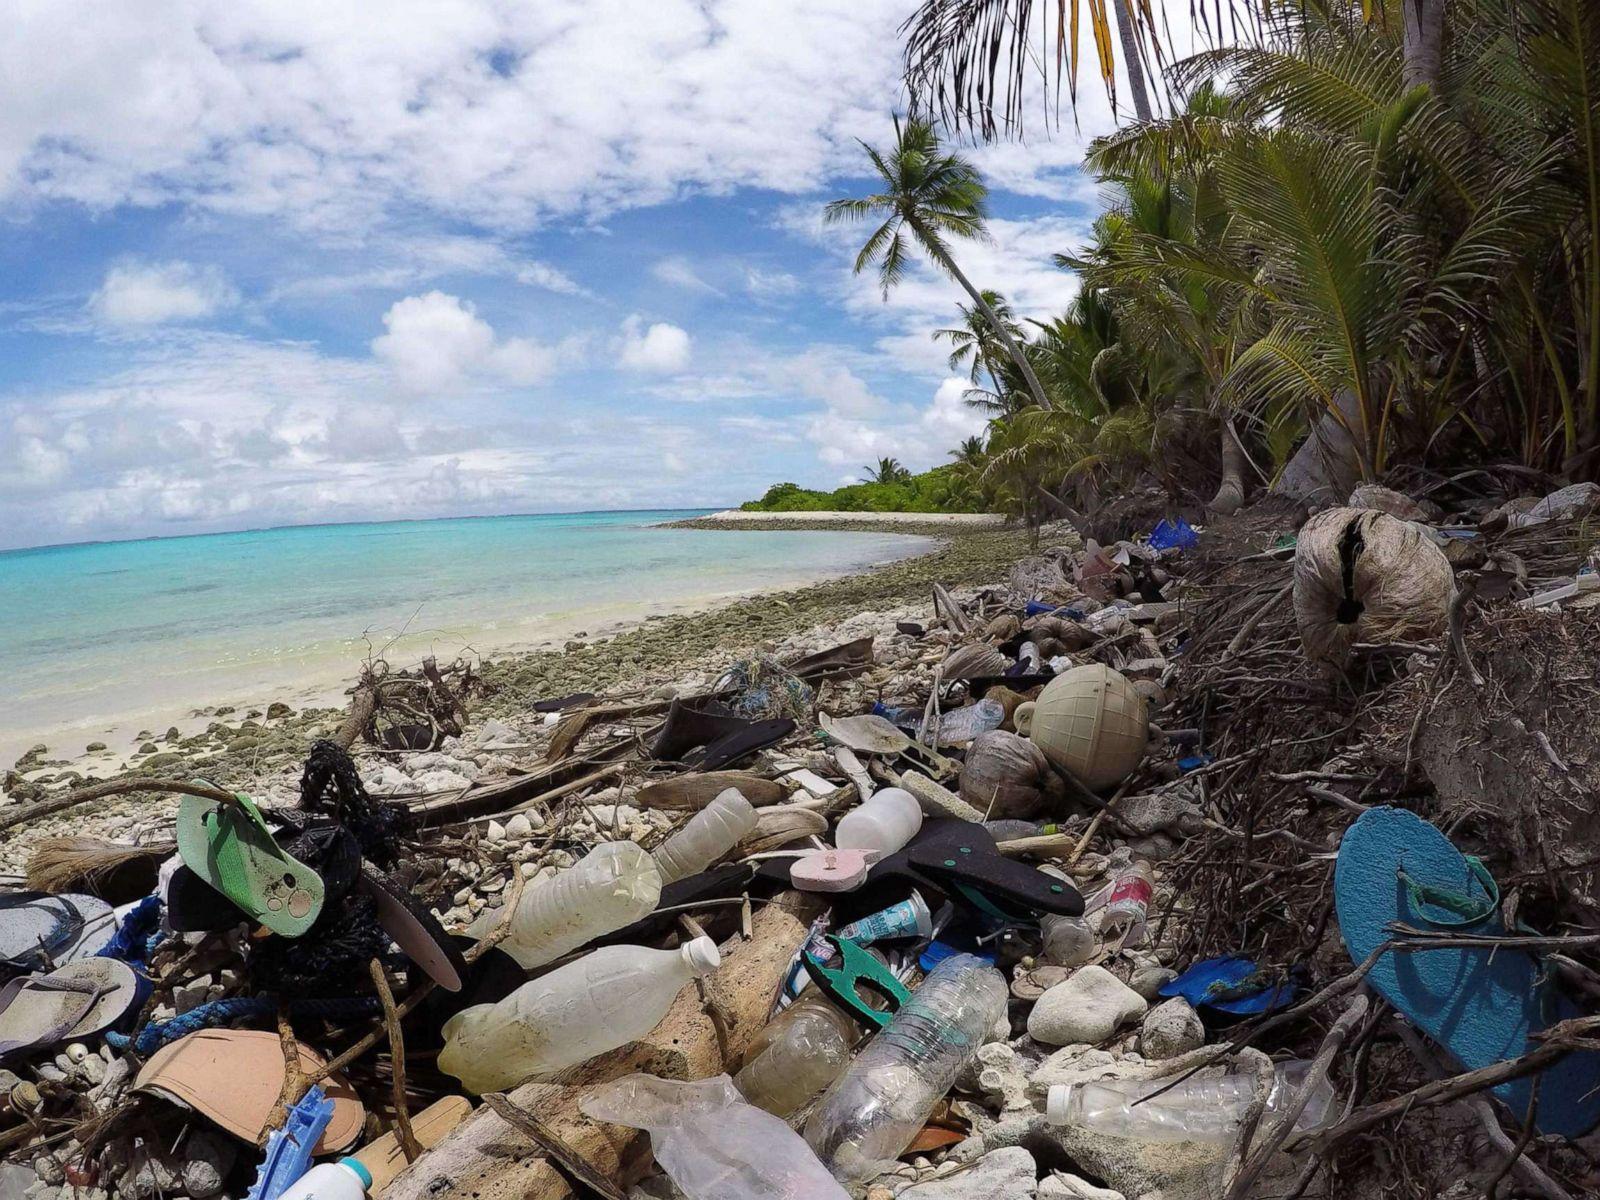 On the remotest of islands, hundreds of tons of plastic